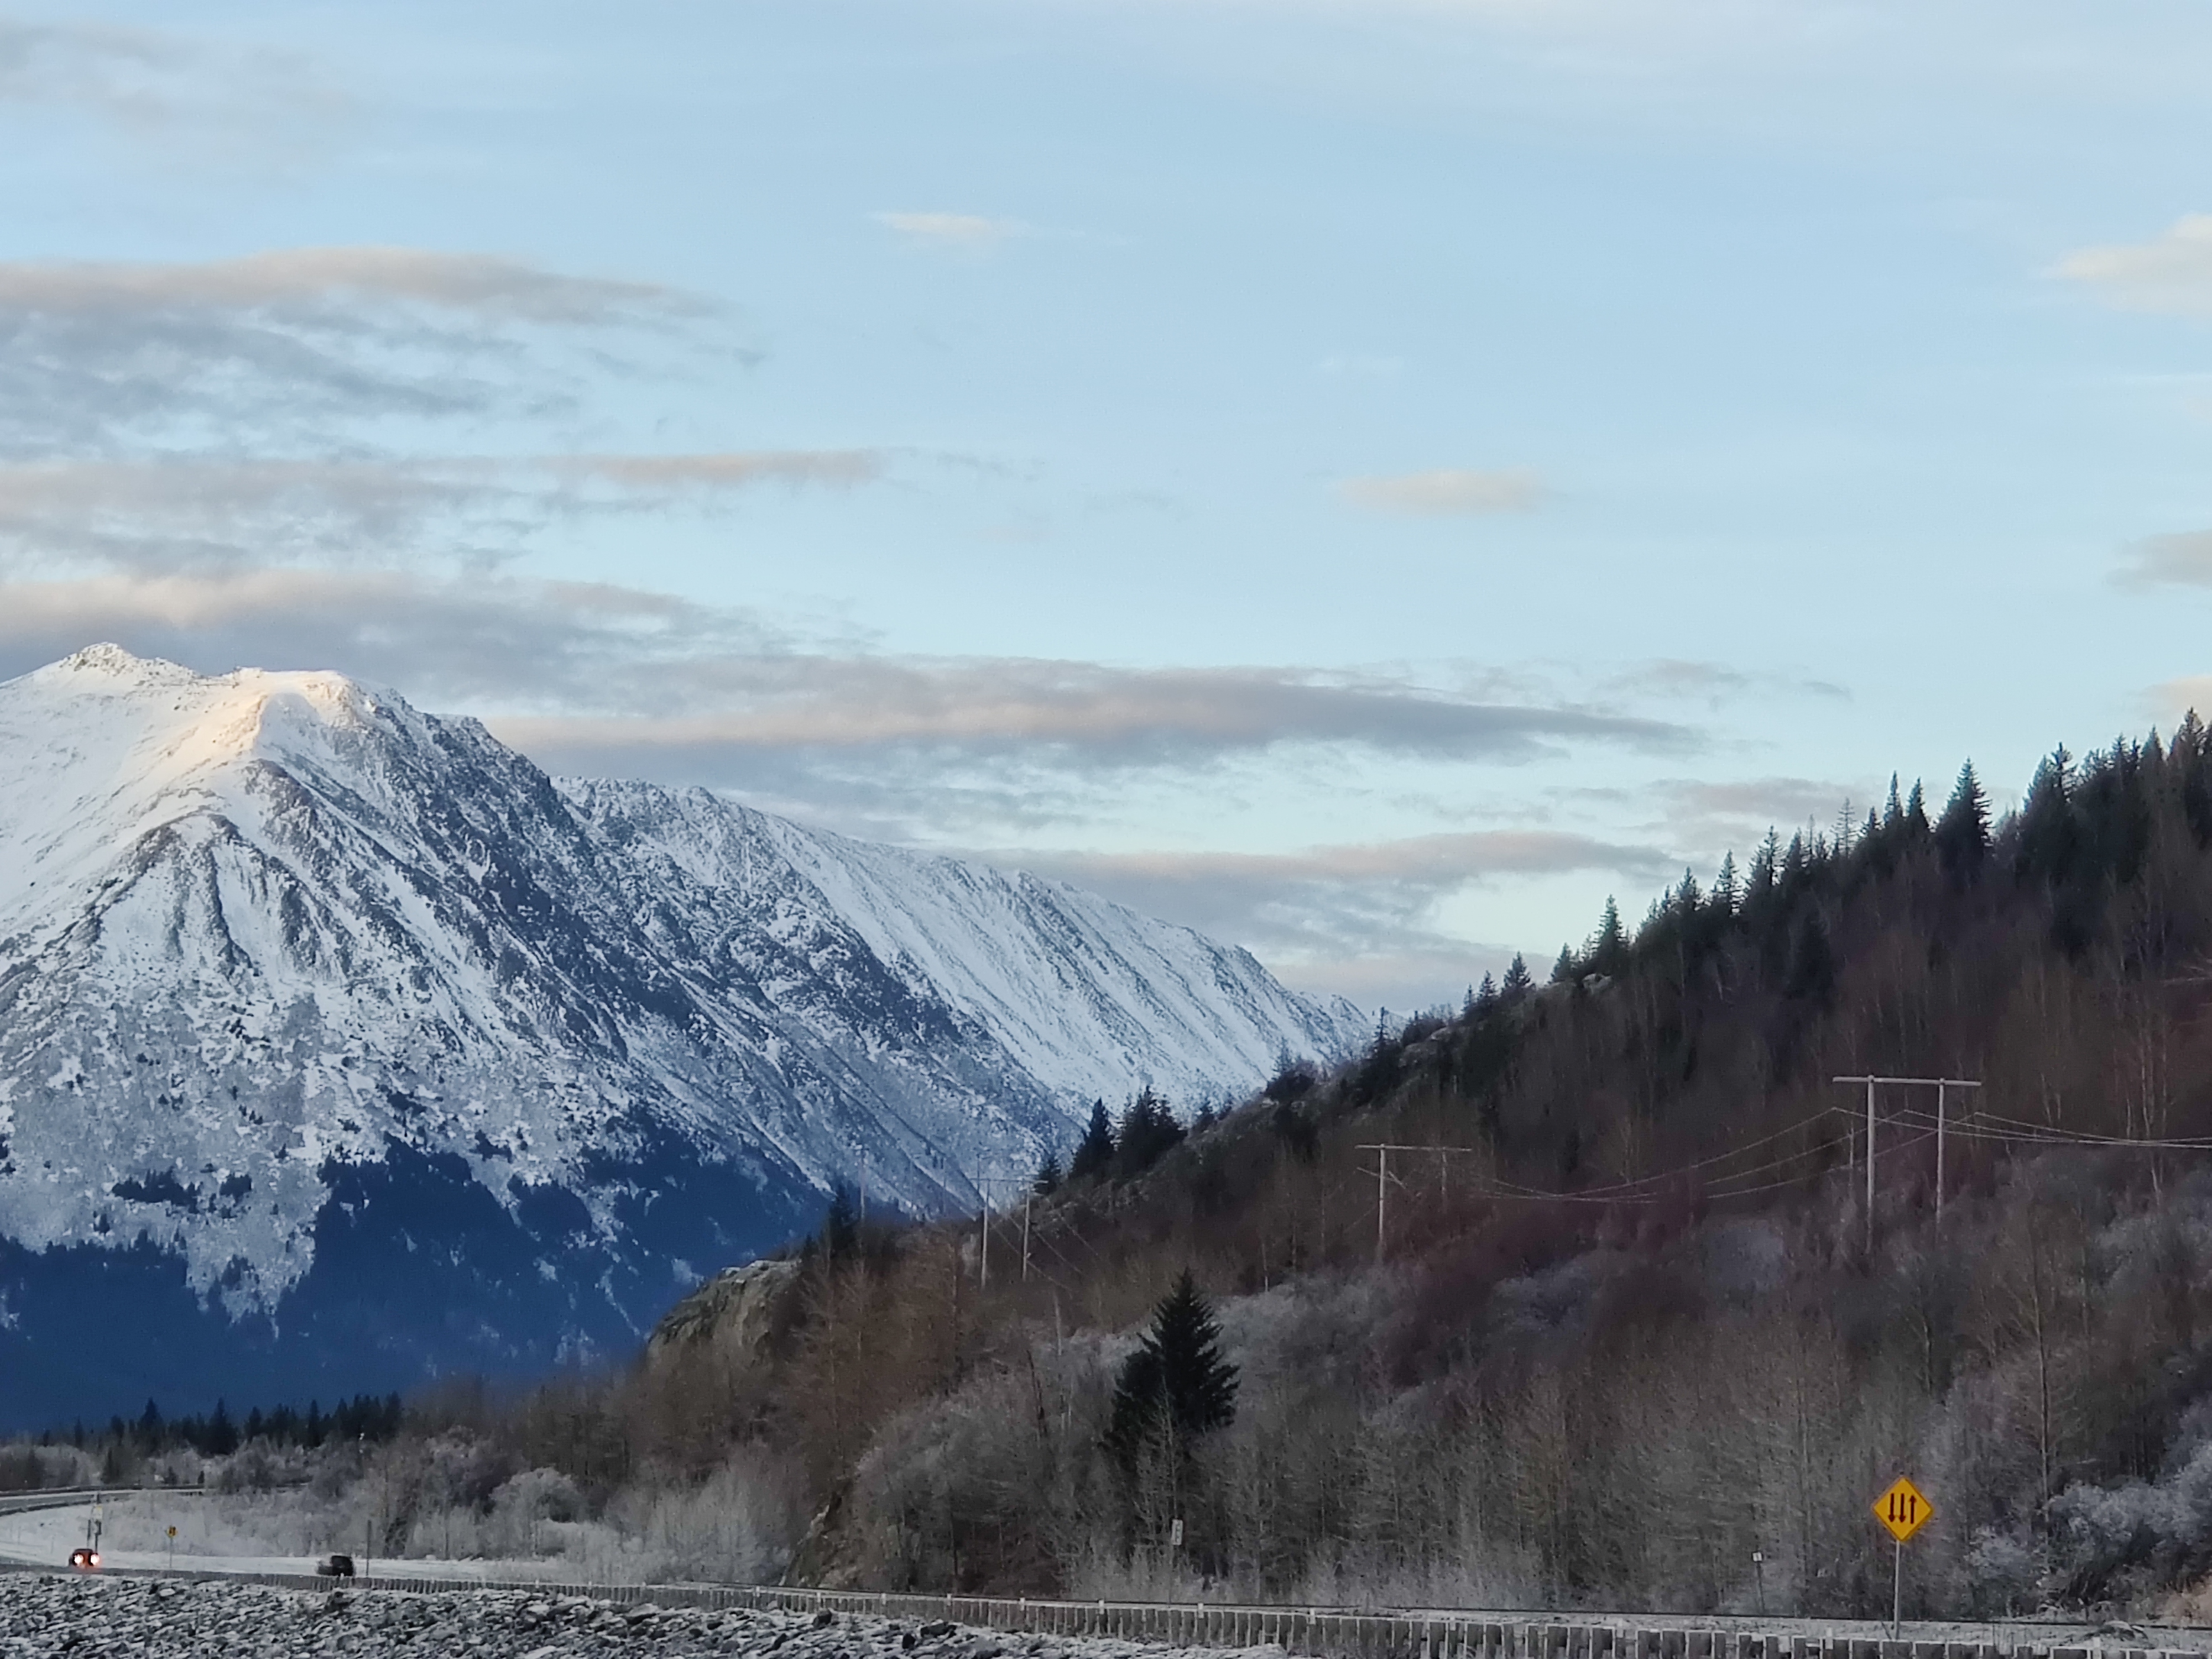 Alaska's Power Grid: Power lines running though mountains